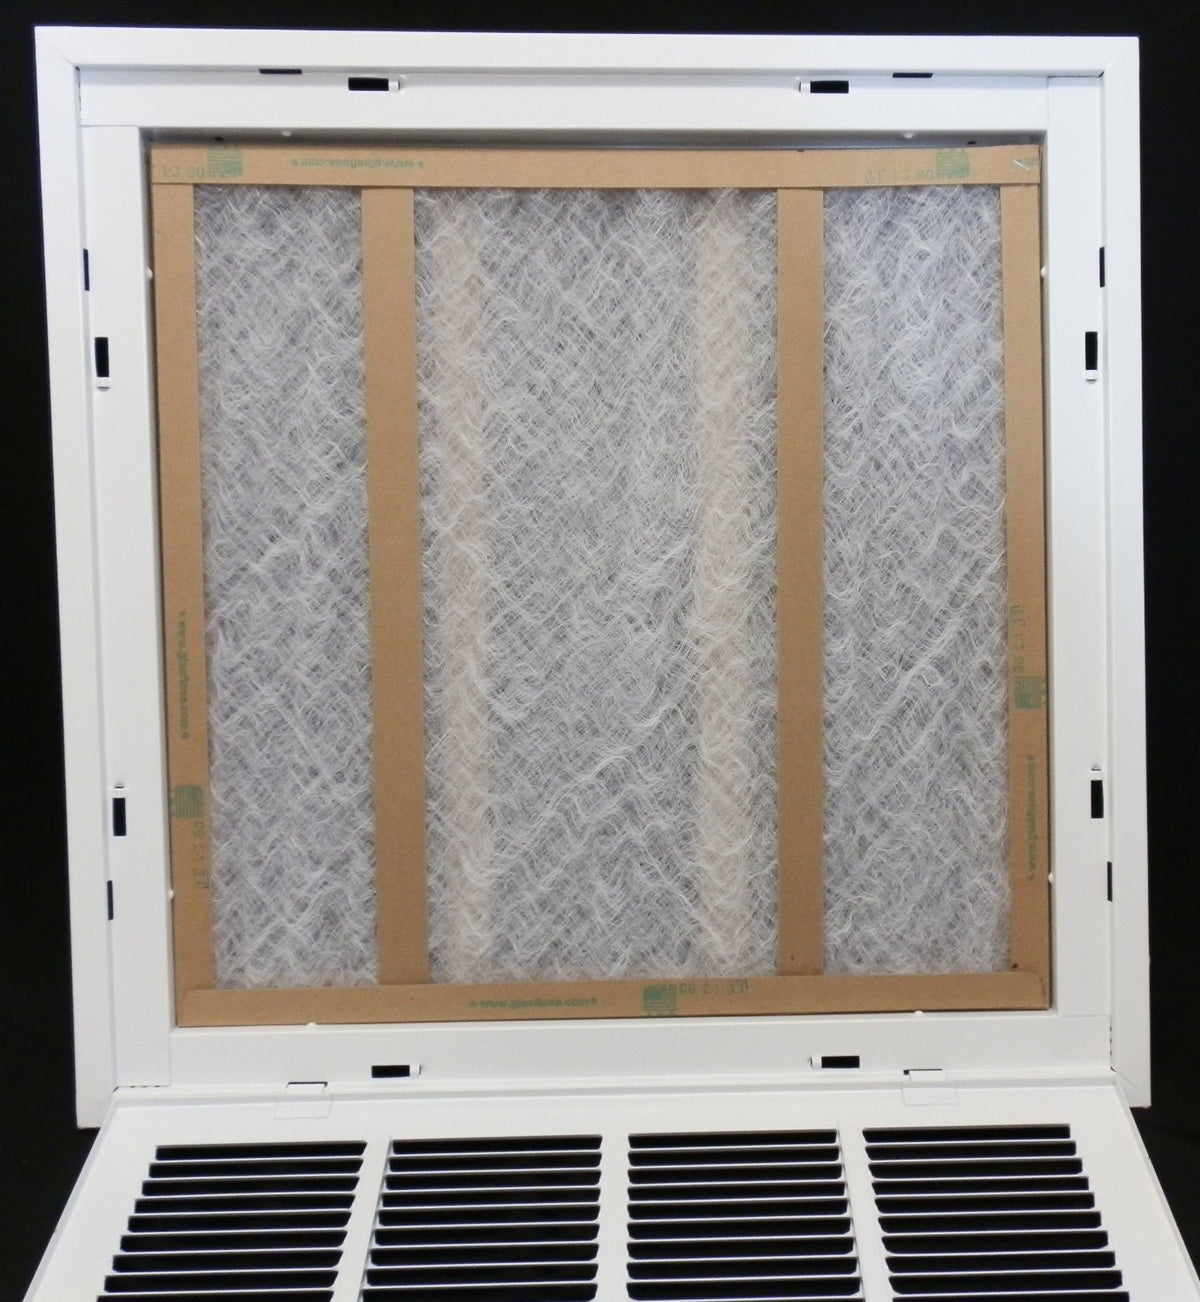 14&quot; X 30&quot; Steel Return Air Filter Grille for 1&quot; Filter - Removable Frame - [Outer Dimensions: 16 5/8&quot; X 32 5/8&quot;]